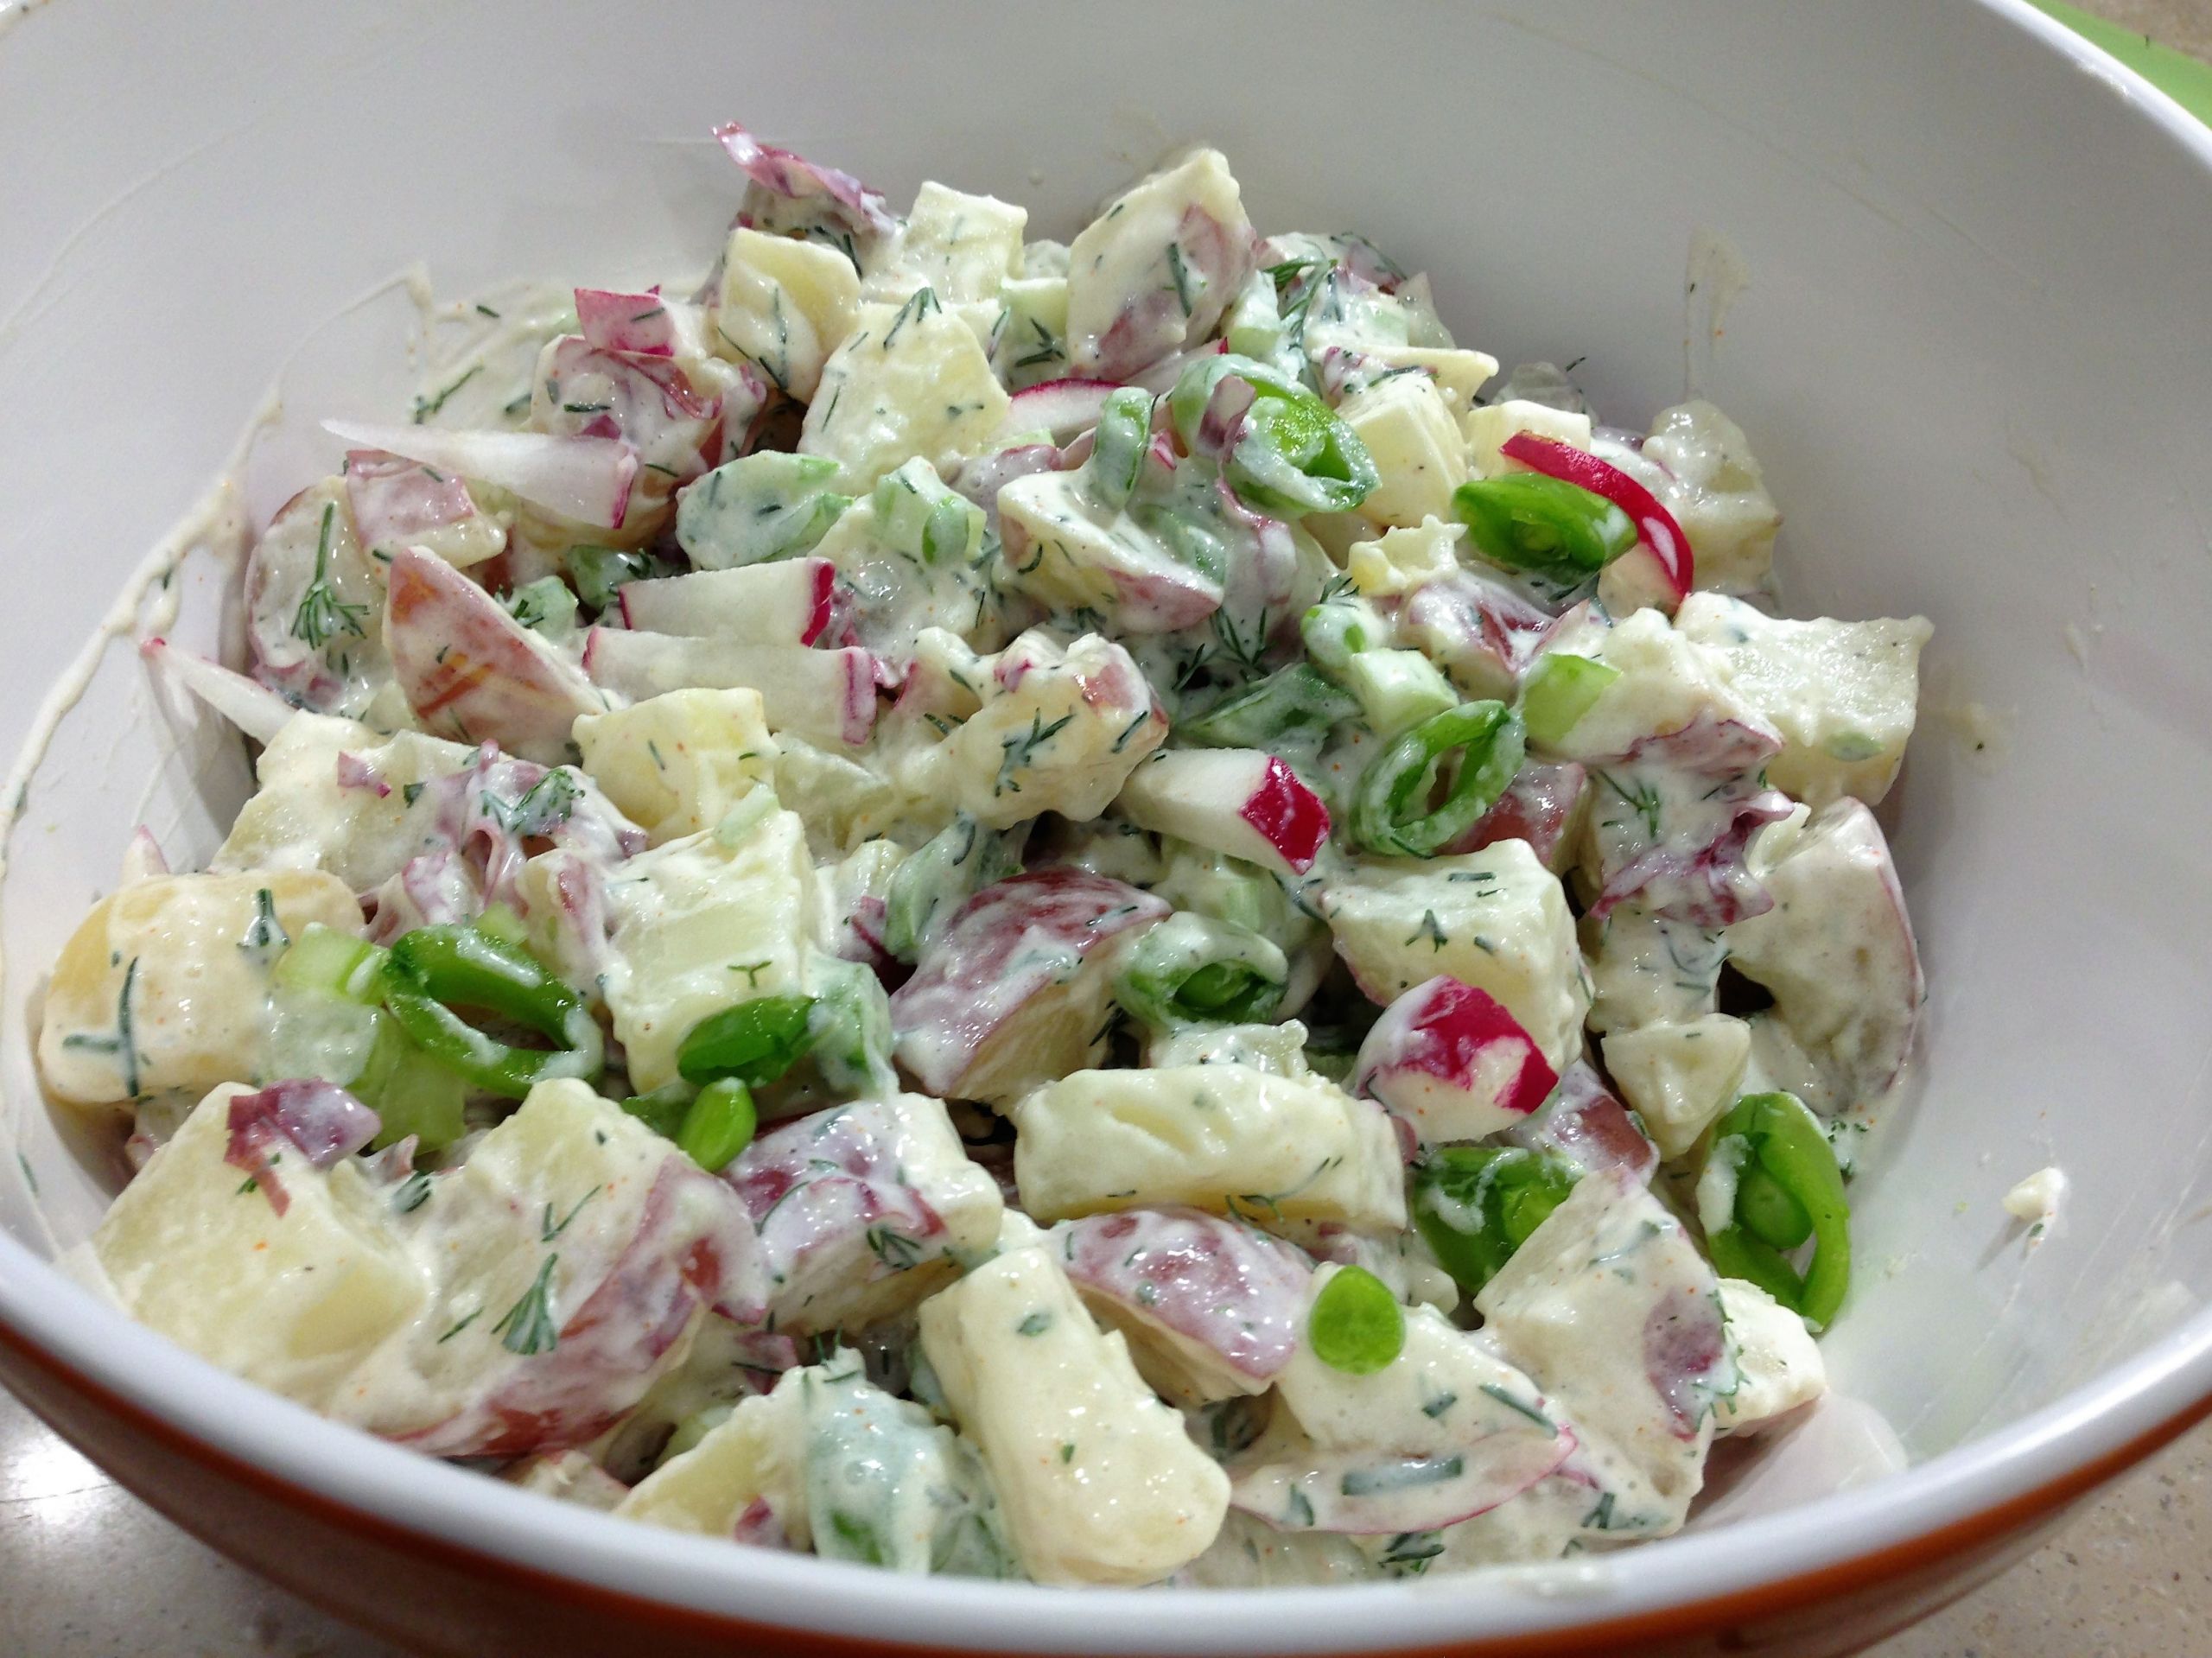 Redskin Potato Salad
 Dilled Ranch Red Skin Potato Salad – Life of the Party Always